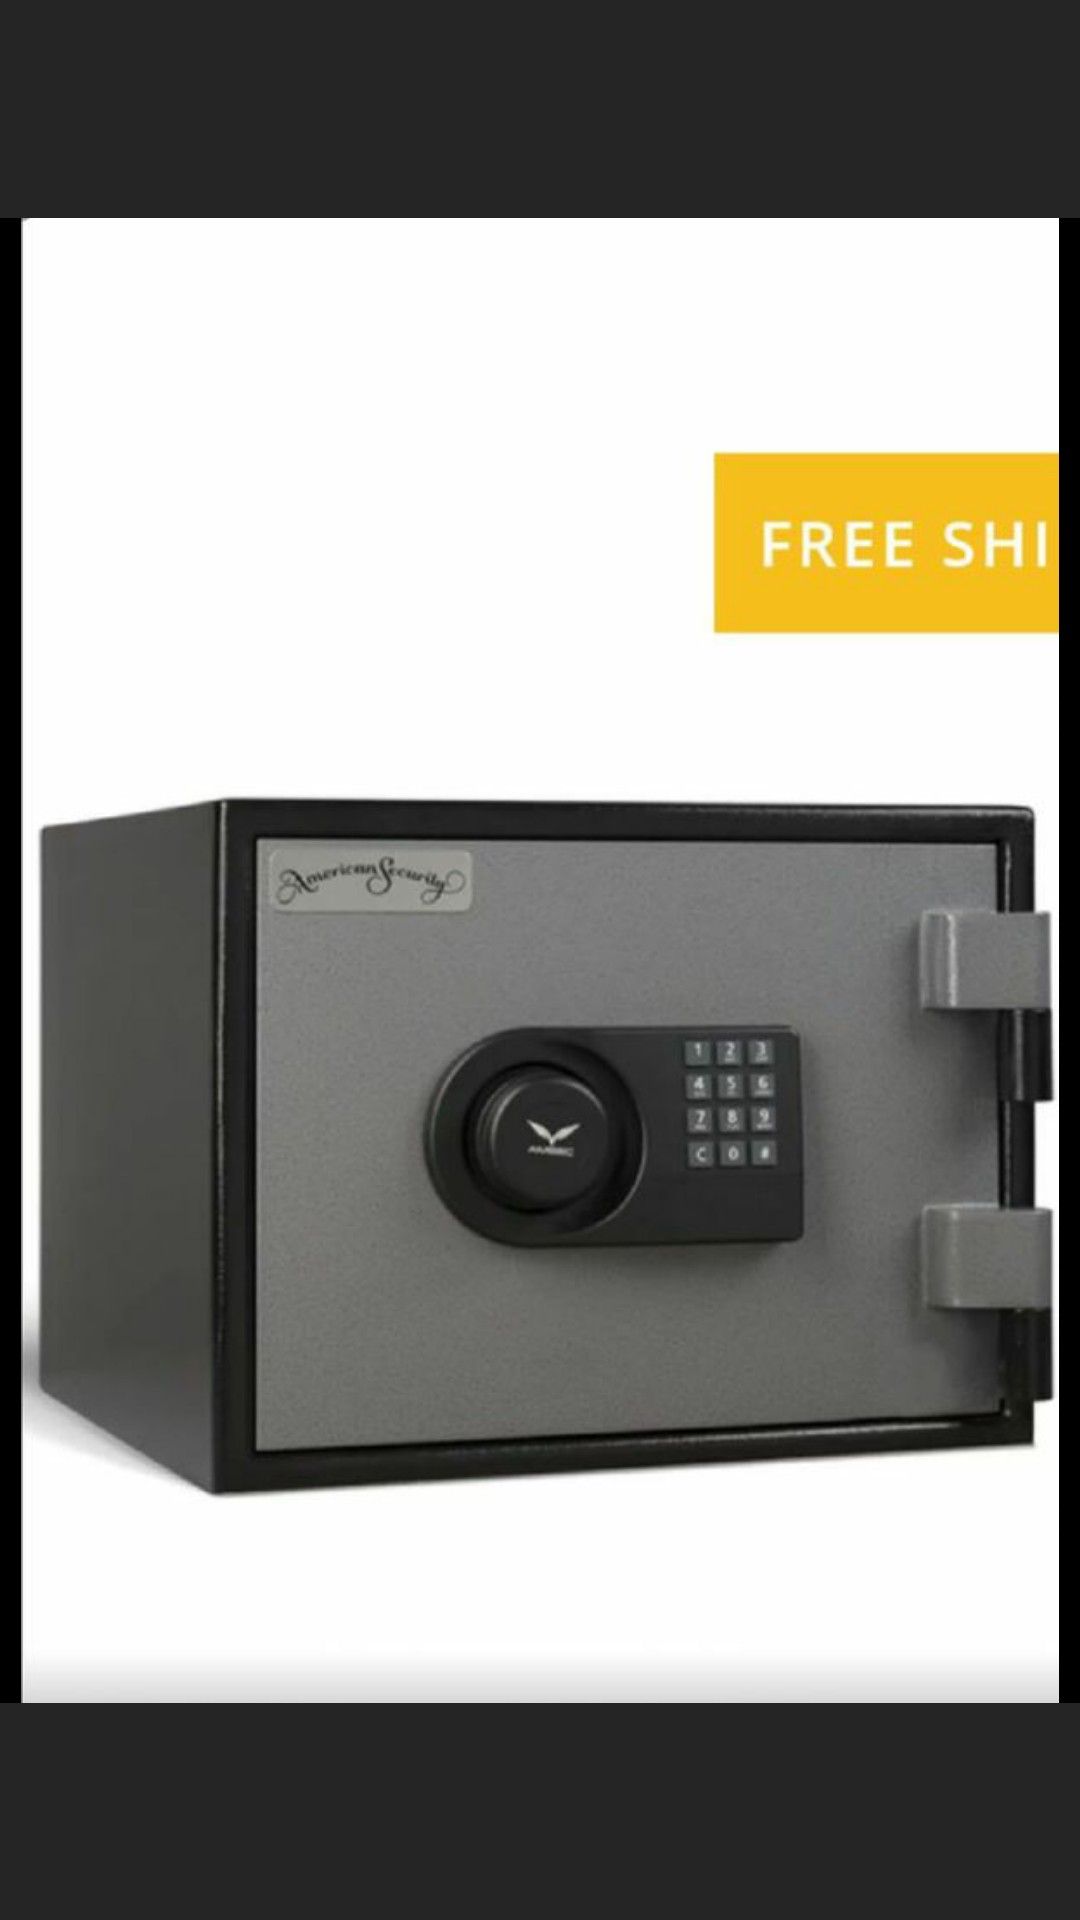 BRAND NEW AMERICAN SECURITY SAFE